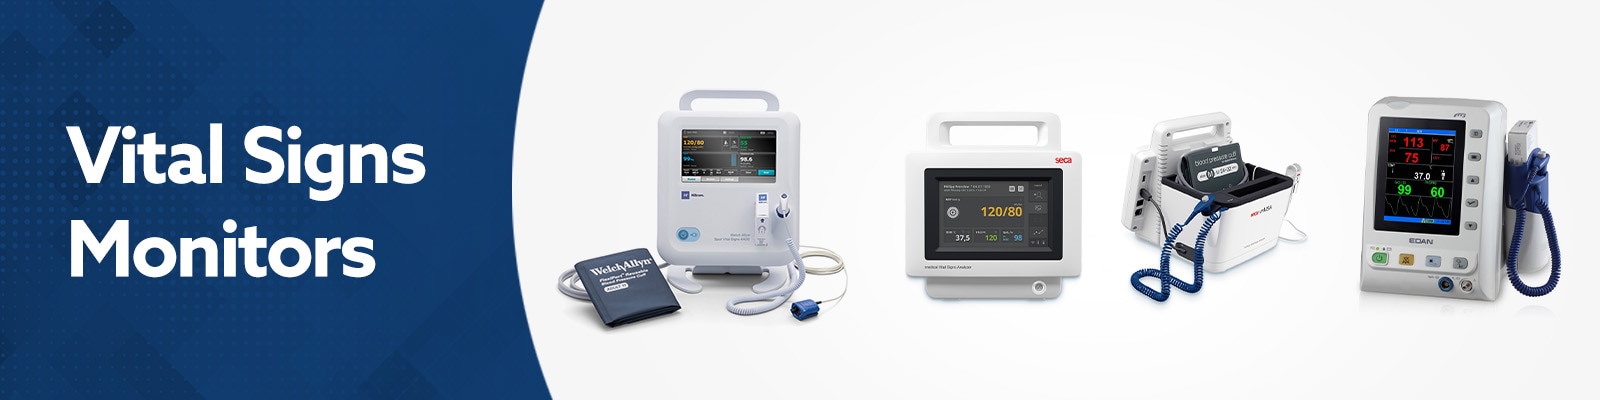 Vital Signs Monitors - Henry Schein Medical